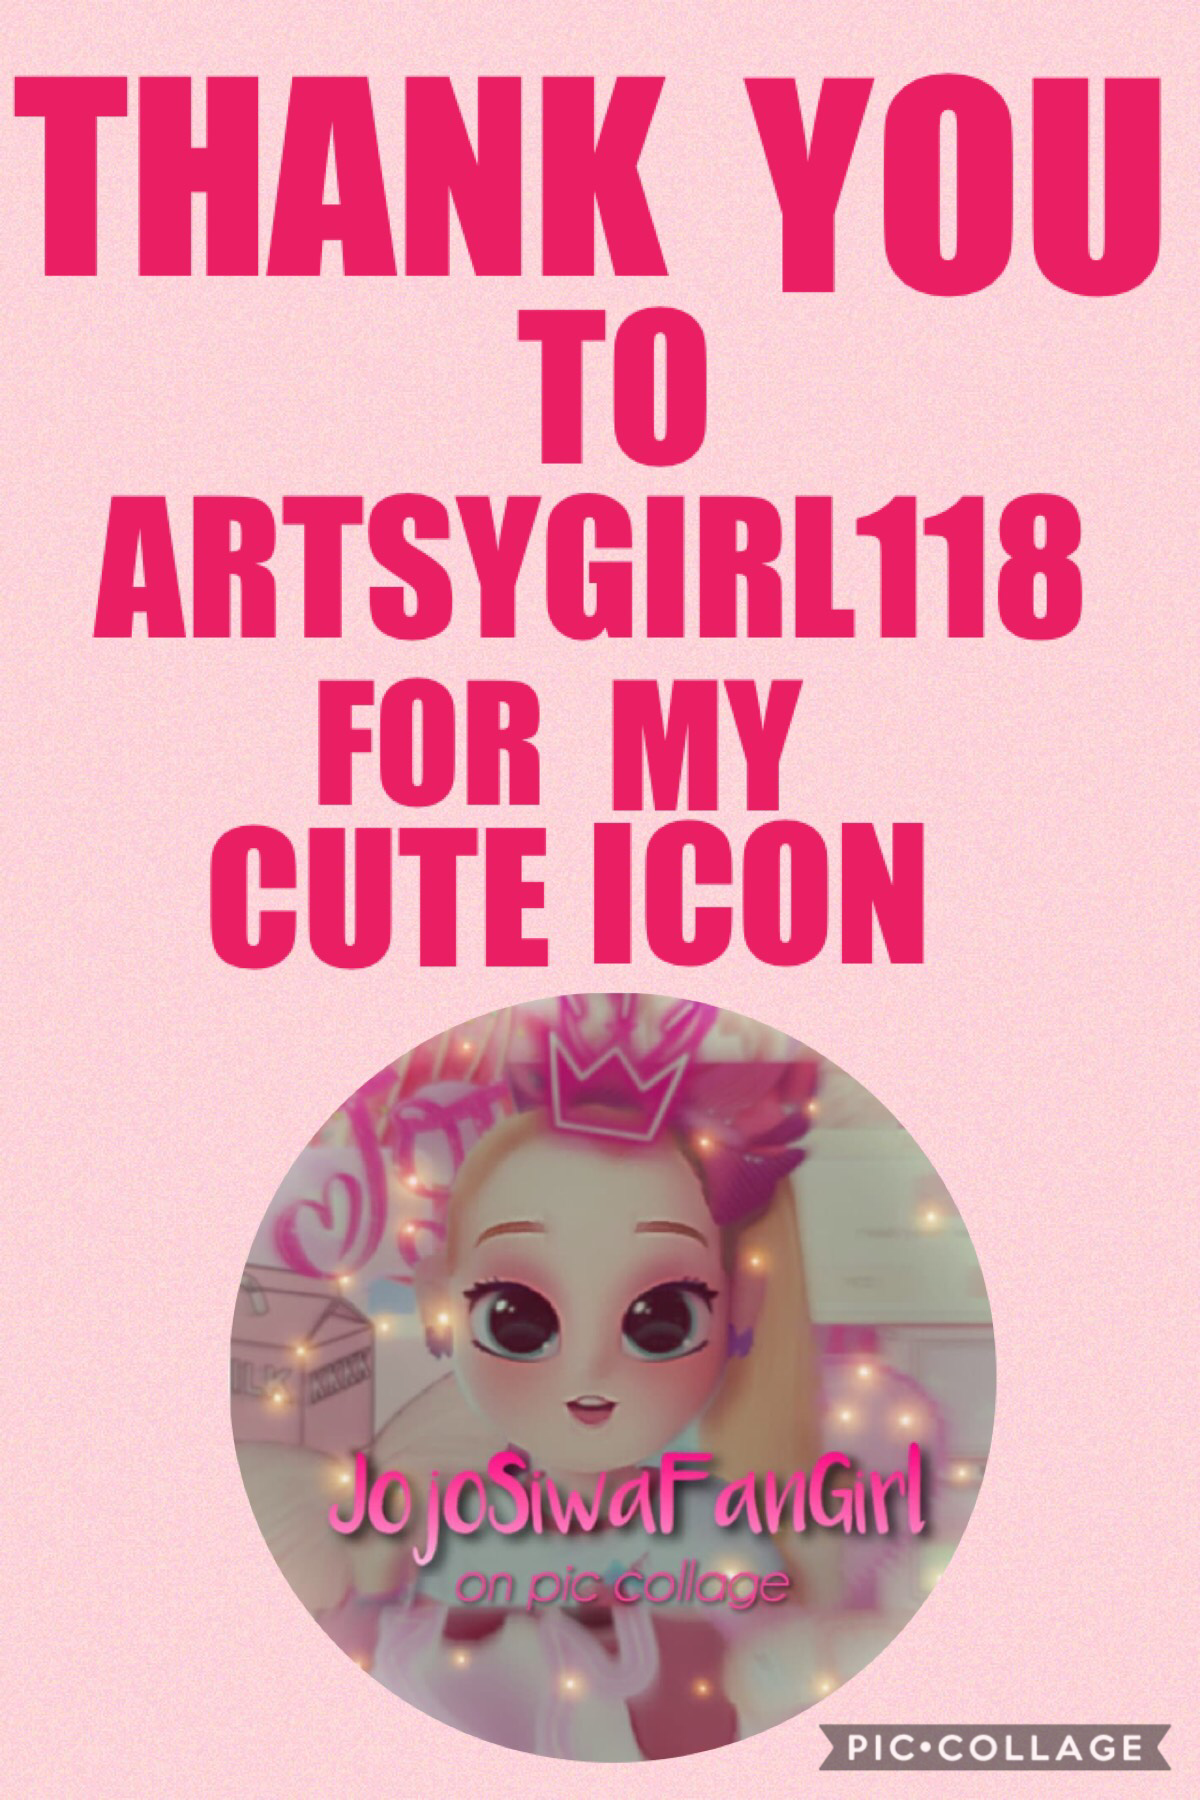 ARTSYGIRL118 what 3 prizes do you want comment below